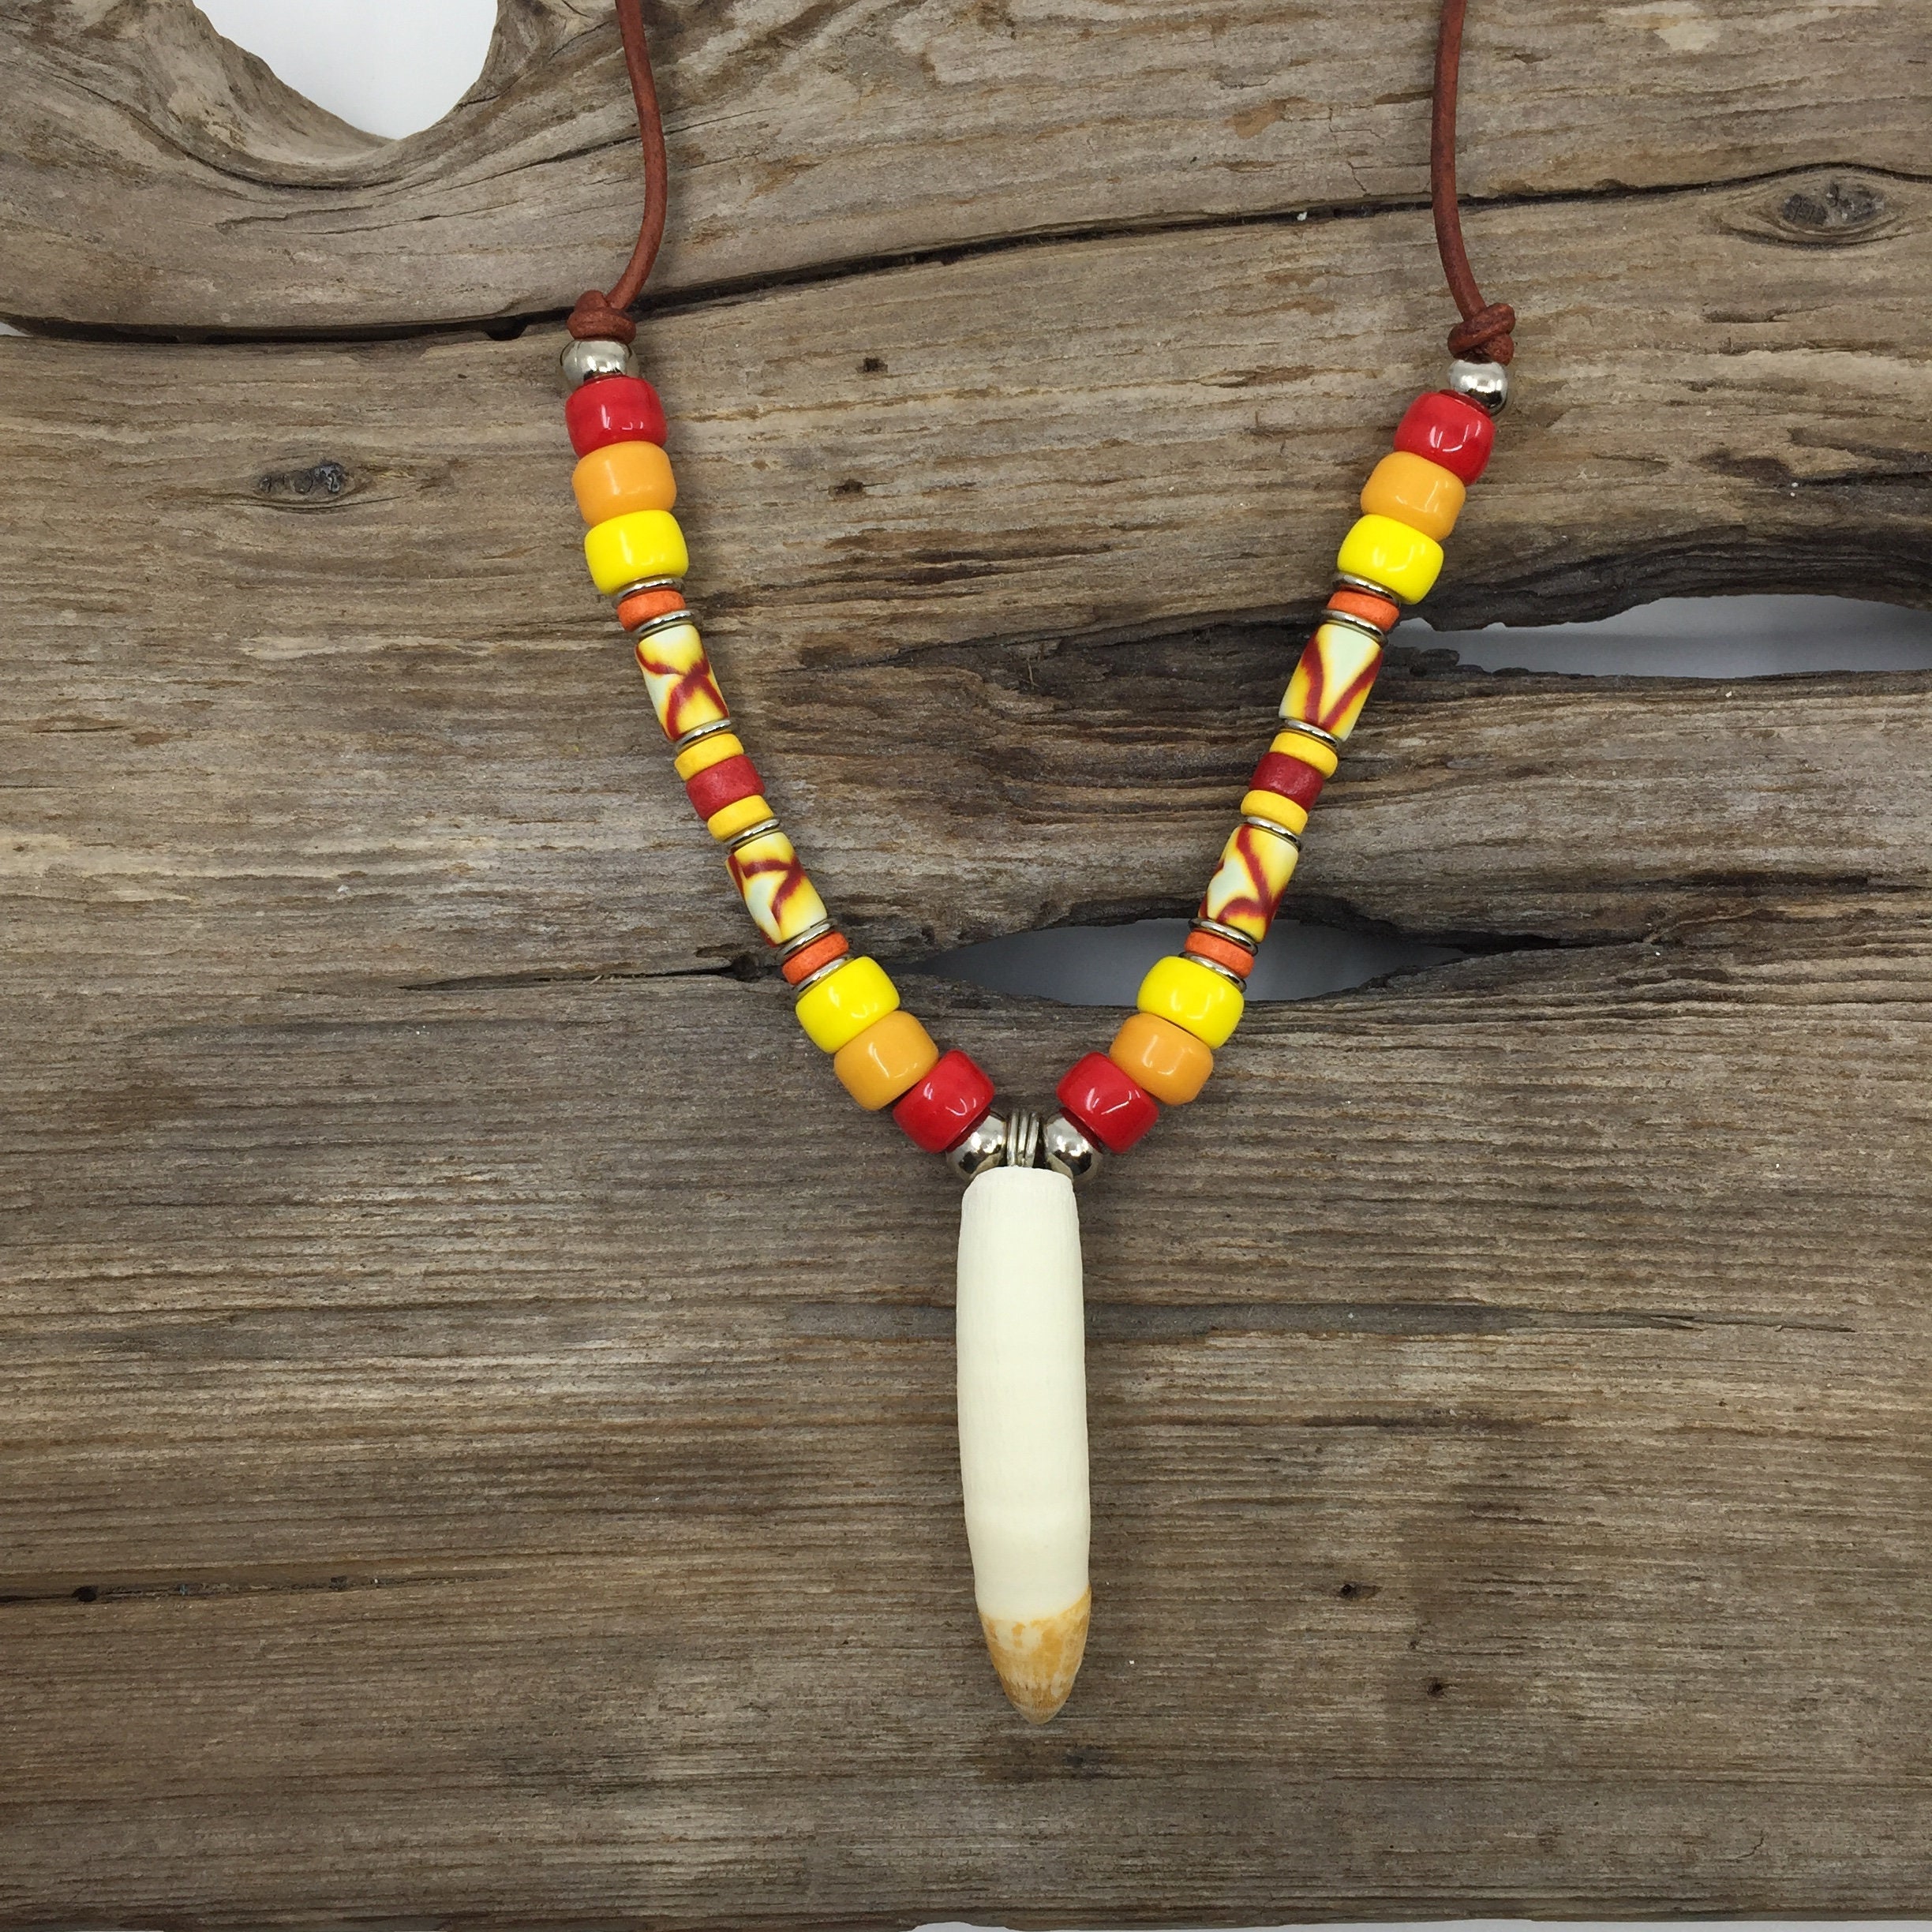 Gator Tooth Necklace - Fimo Bead Collection, Natural Selections Inc.